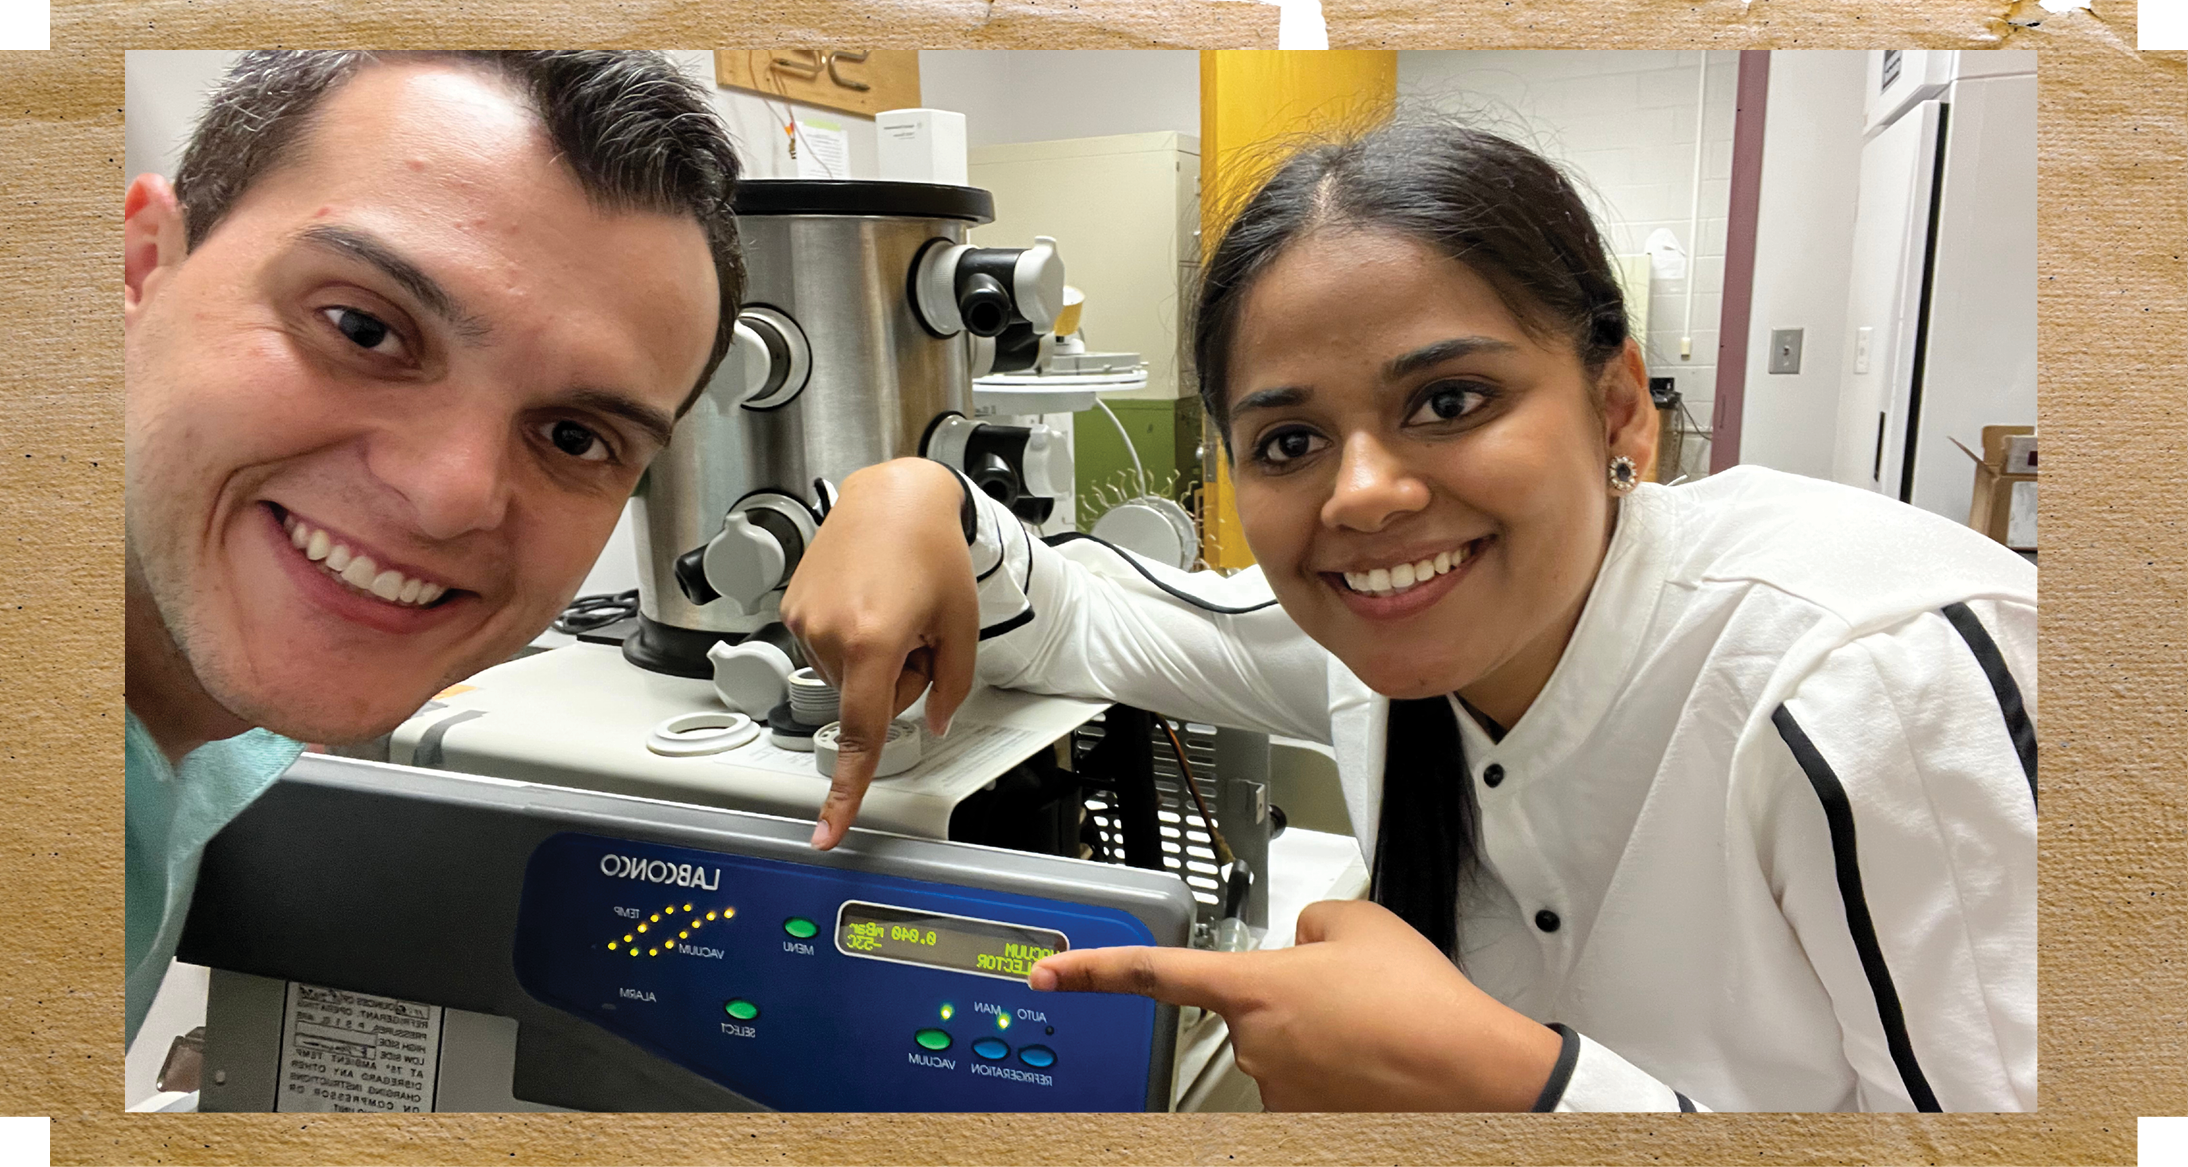 Dr. Eduardo Calixto is on the left side with a huge smile and on the left is Jasleen Kaur, also with a huge smile, pointing at the screen of the feeze dryer that separtes both herself and Eduardo.